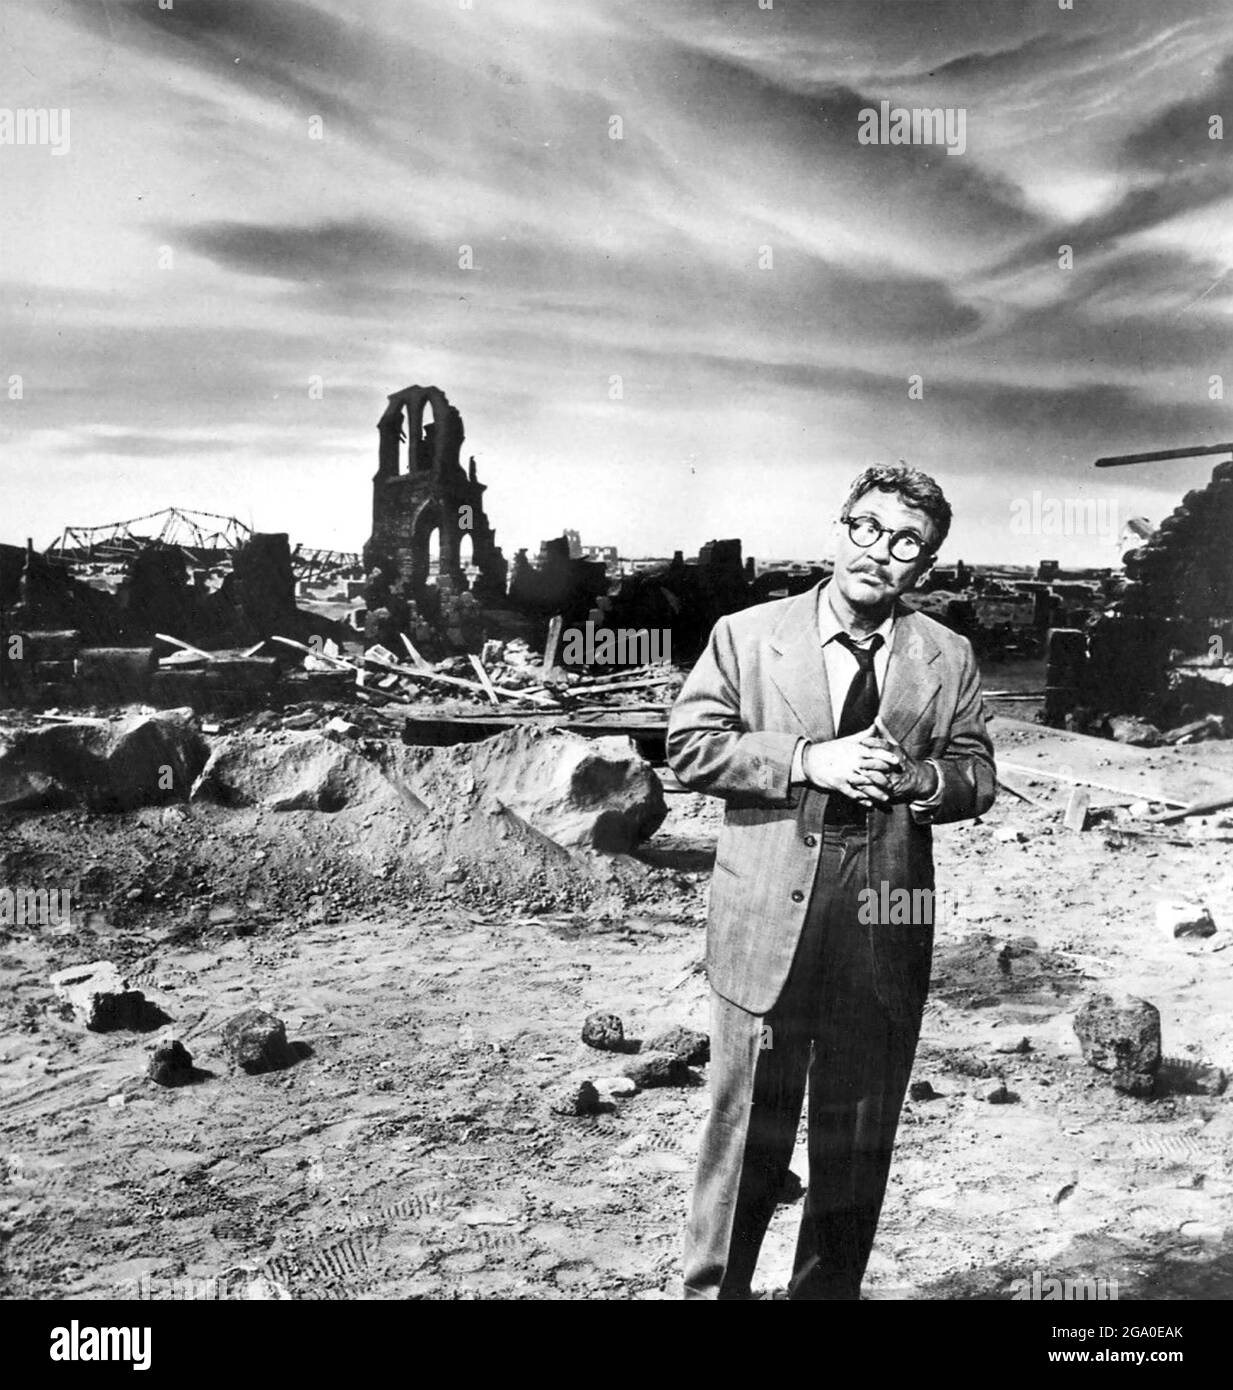 THE TWILIGHT ZONE 1959 CBS TV series with Burgess Meredith in 'Time Enough at Last' - episode 8 from Season 1 Stock Photo